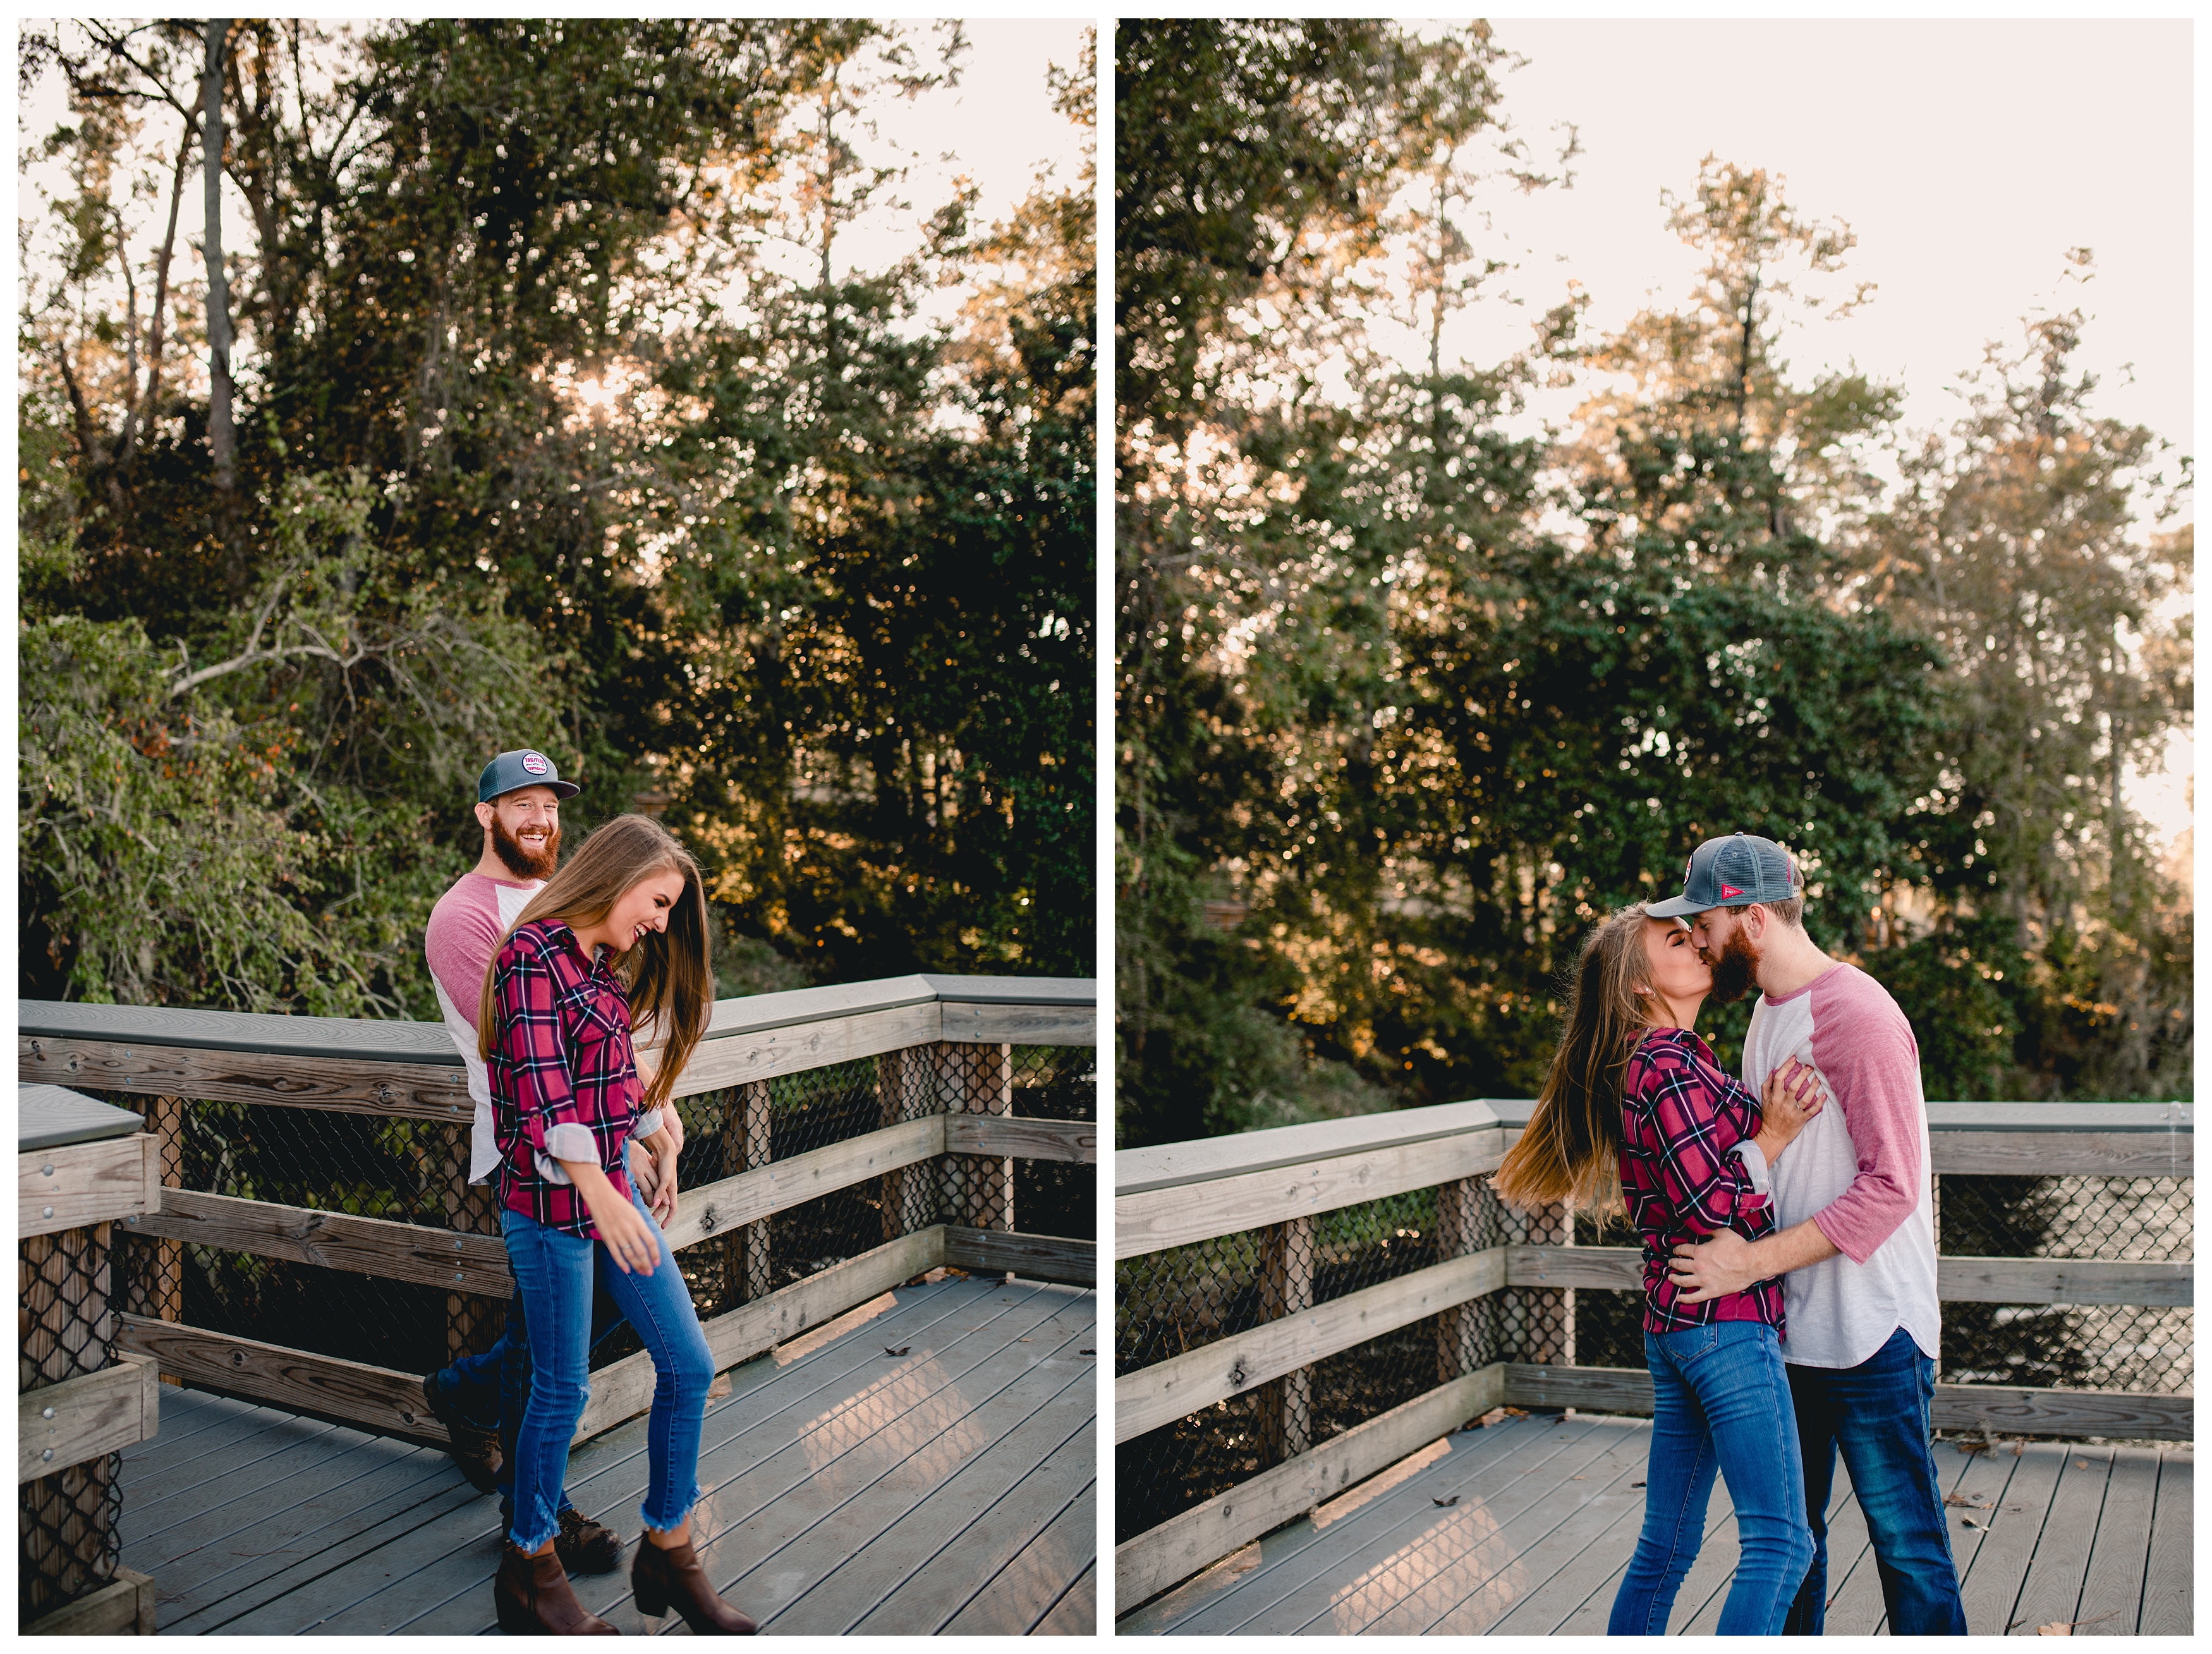 Intimate and casual moments captured by Tallahassee professional wedding photographer. Shelly Williams Photography